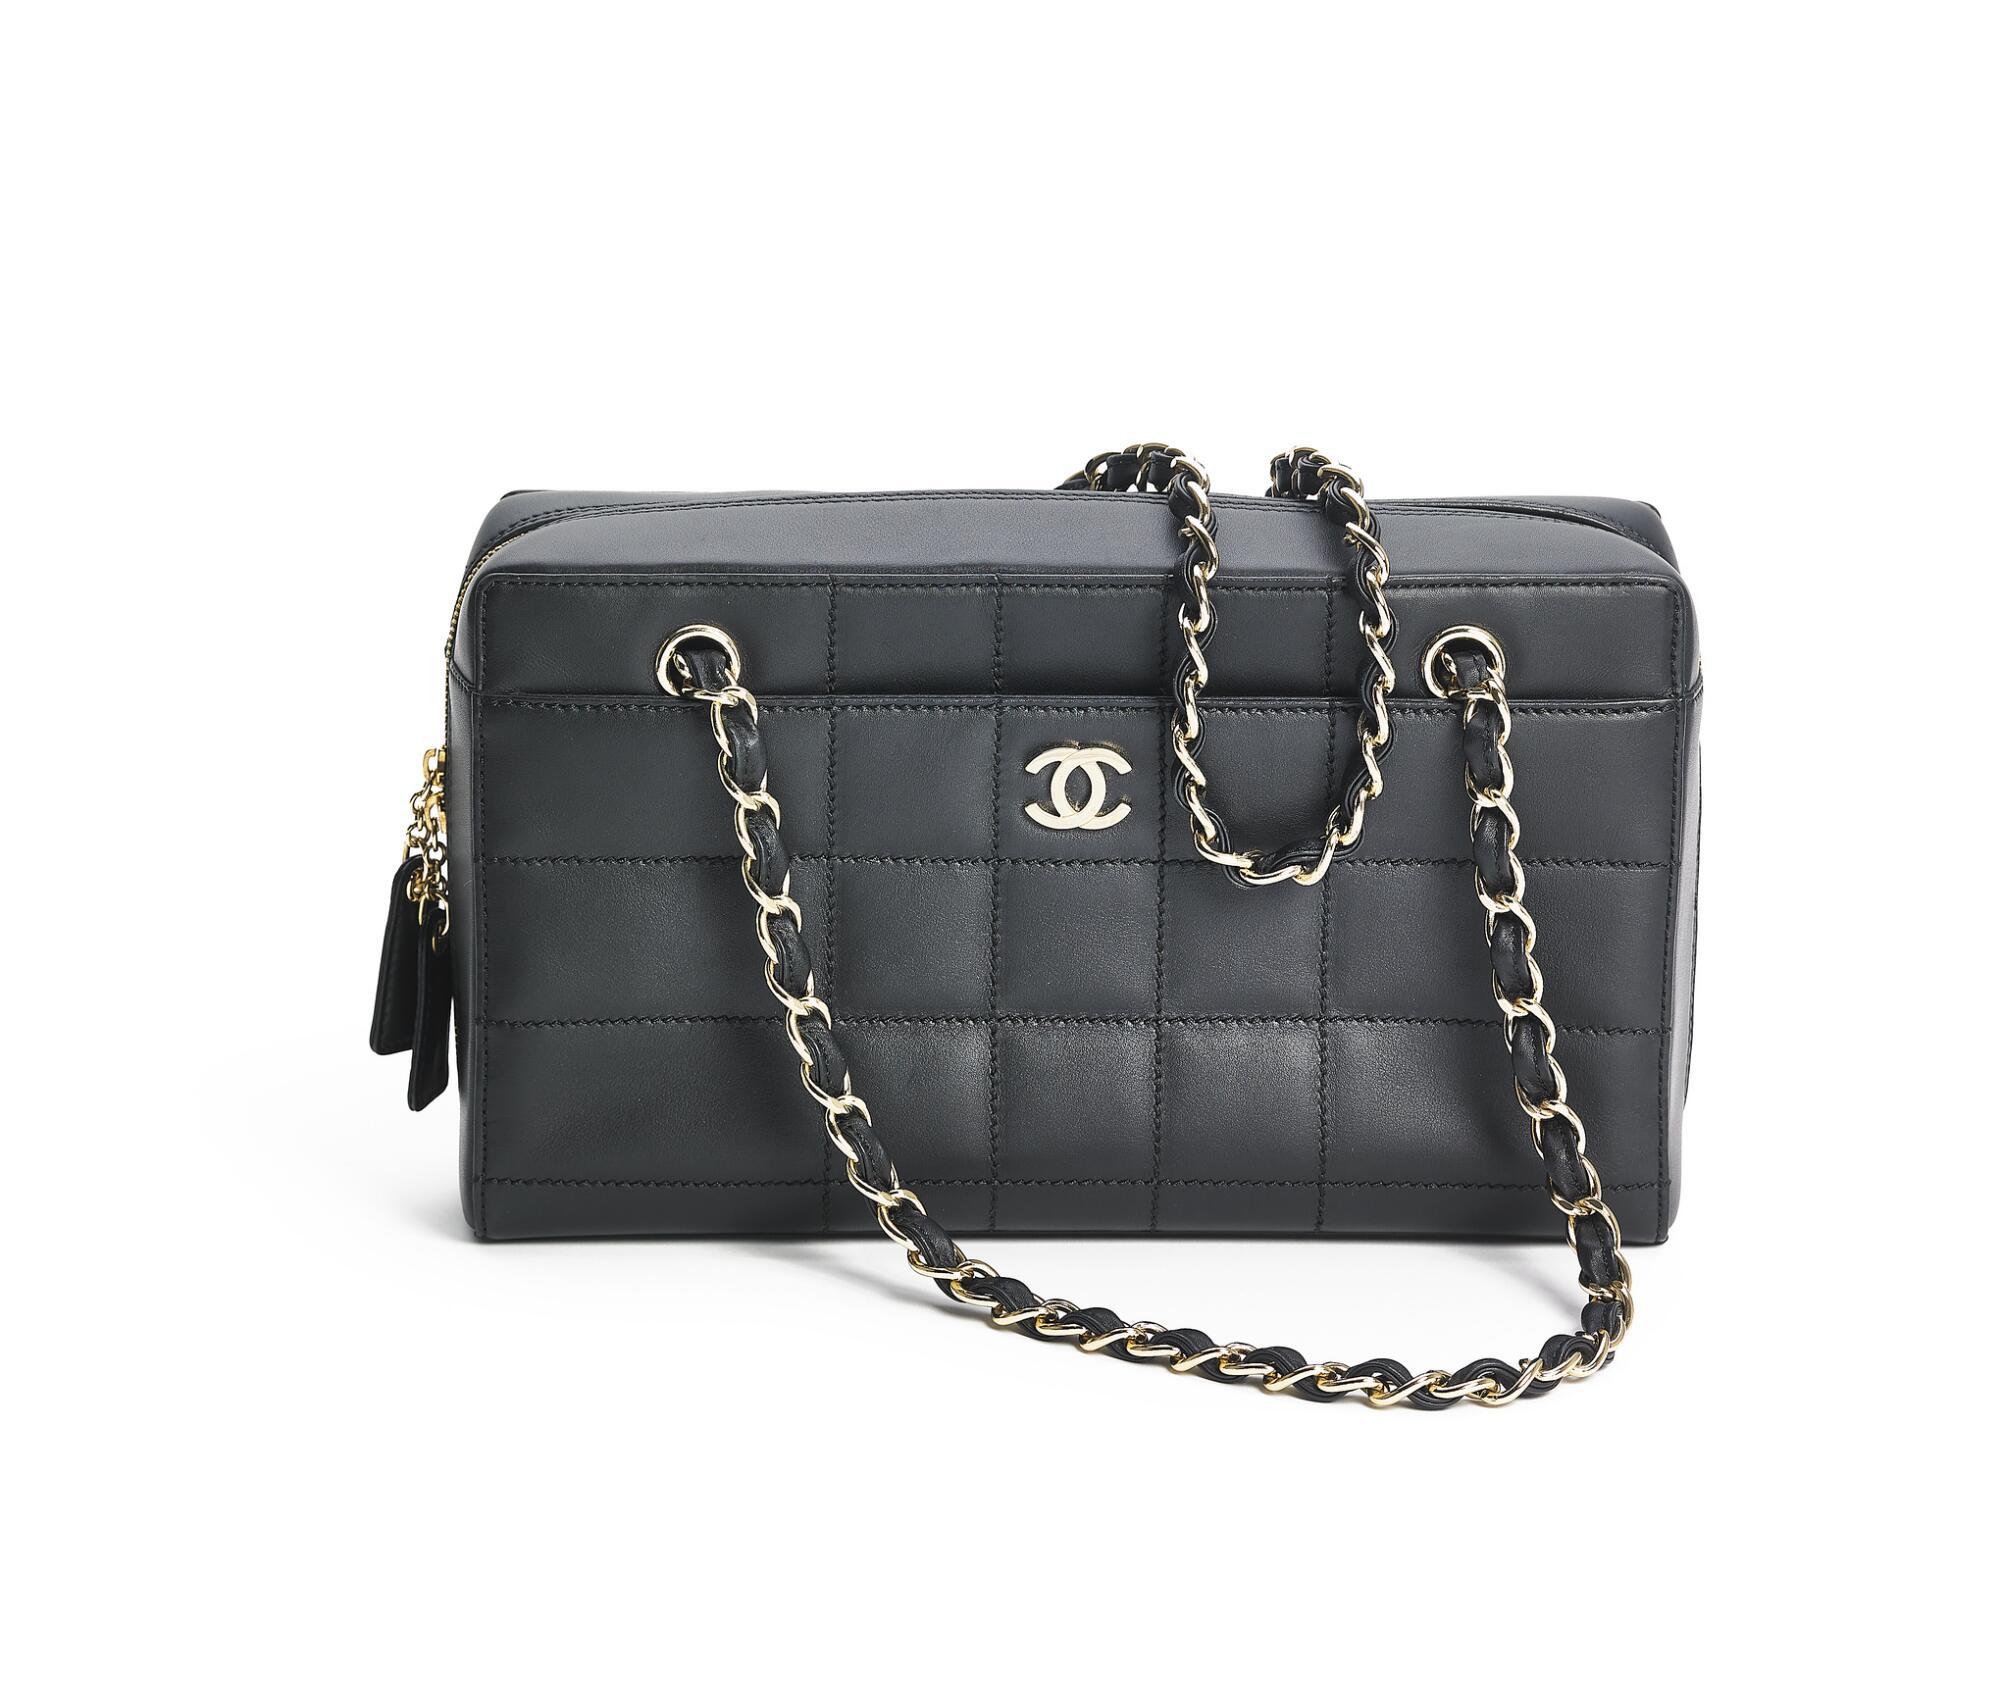 Nun's keys and soldier's bags: How Chanel's 2.55 became a classic